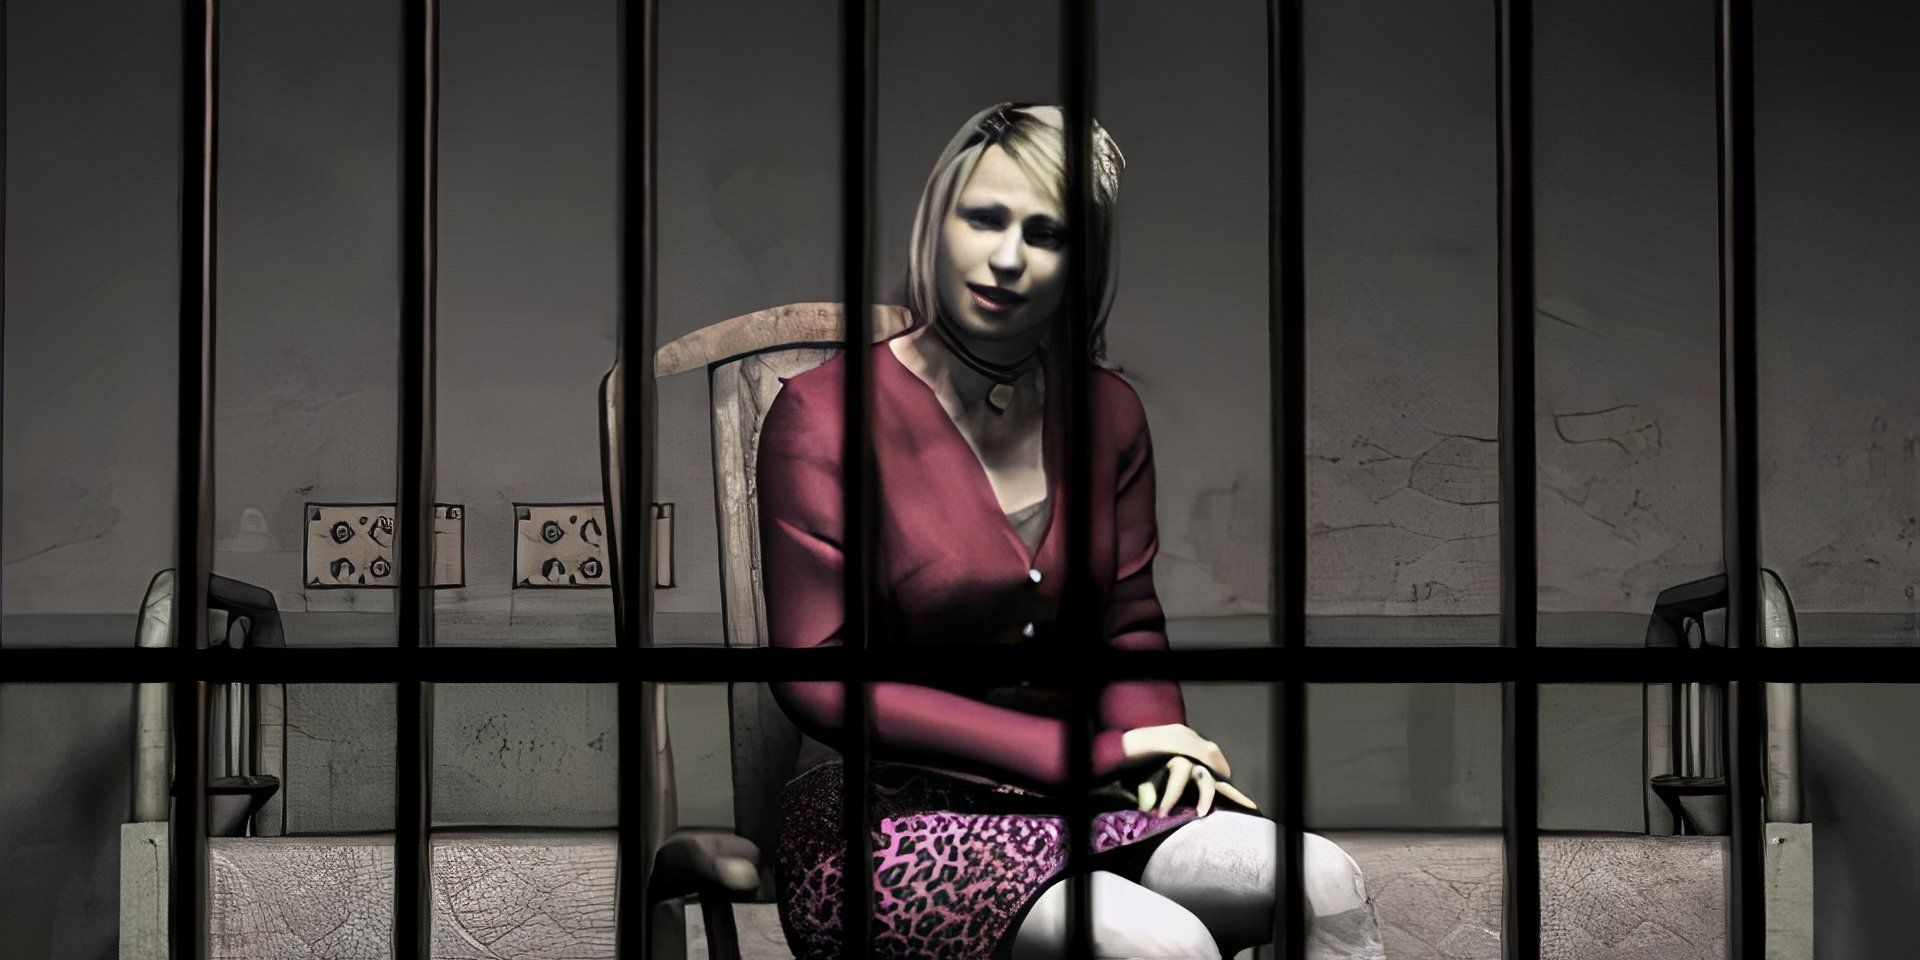 Maria jail cell scene Silent Hill 2